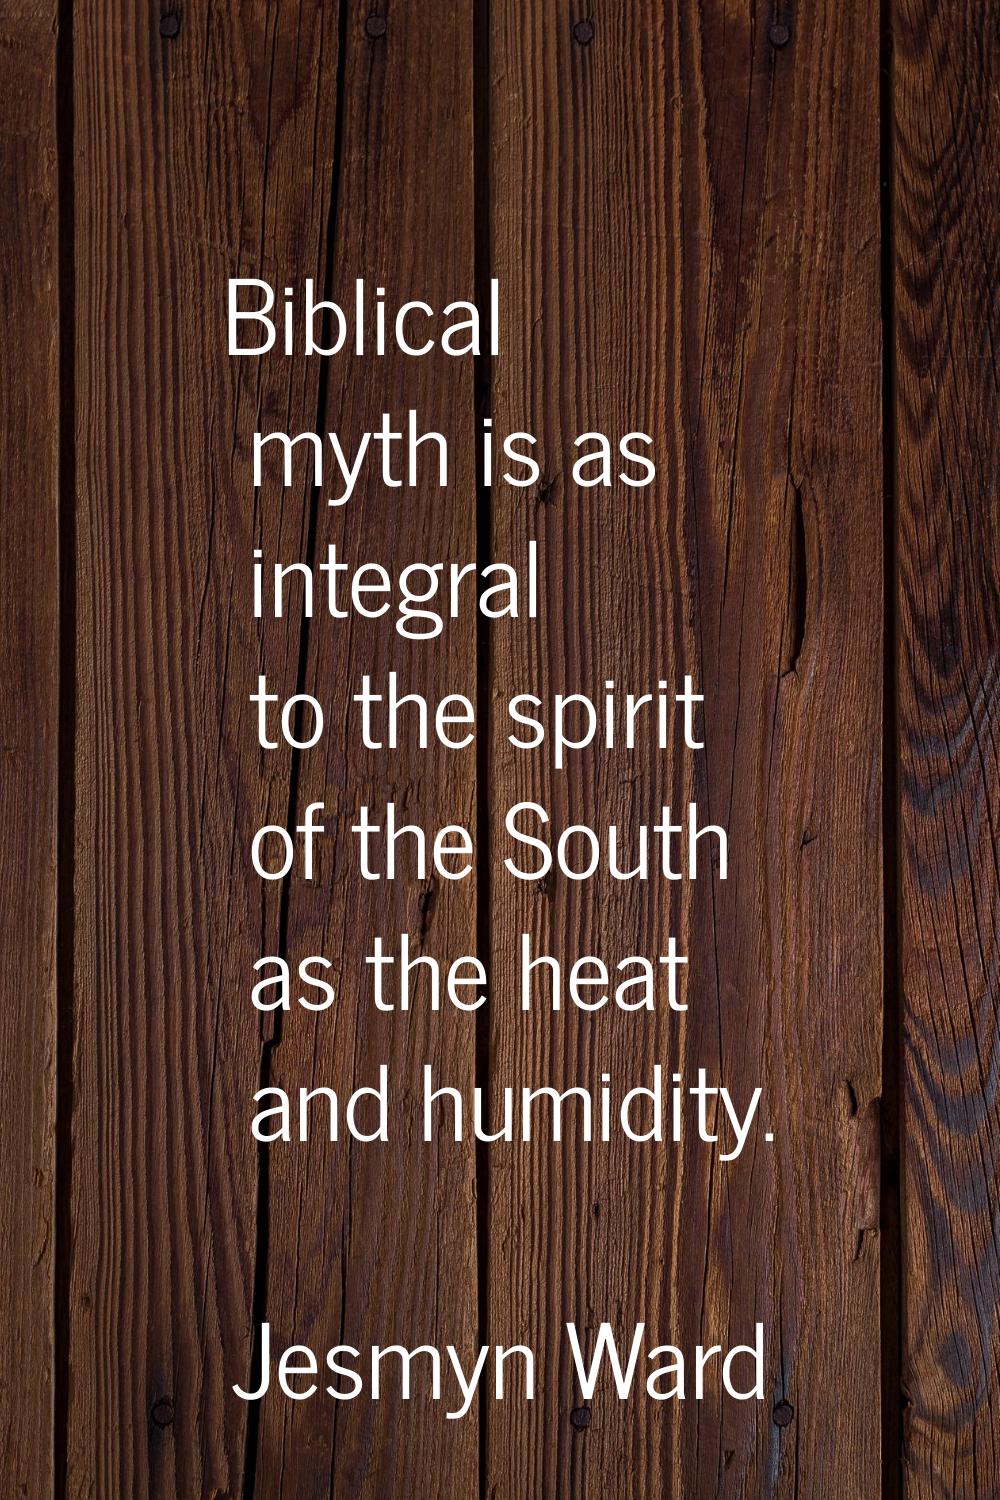 Biblical myth is as integral to the spirit of the South as the heat and humidity.